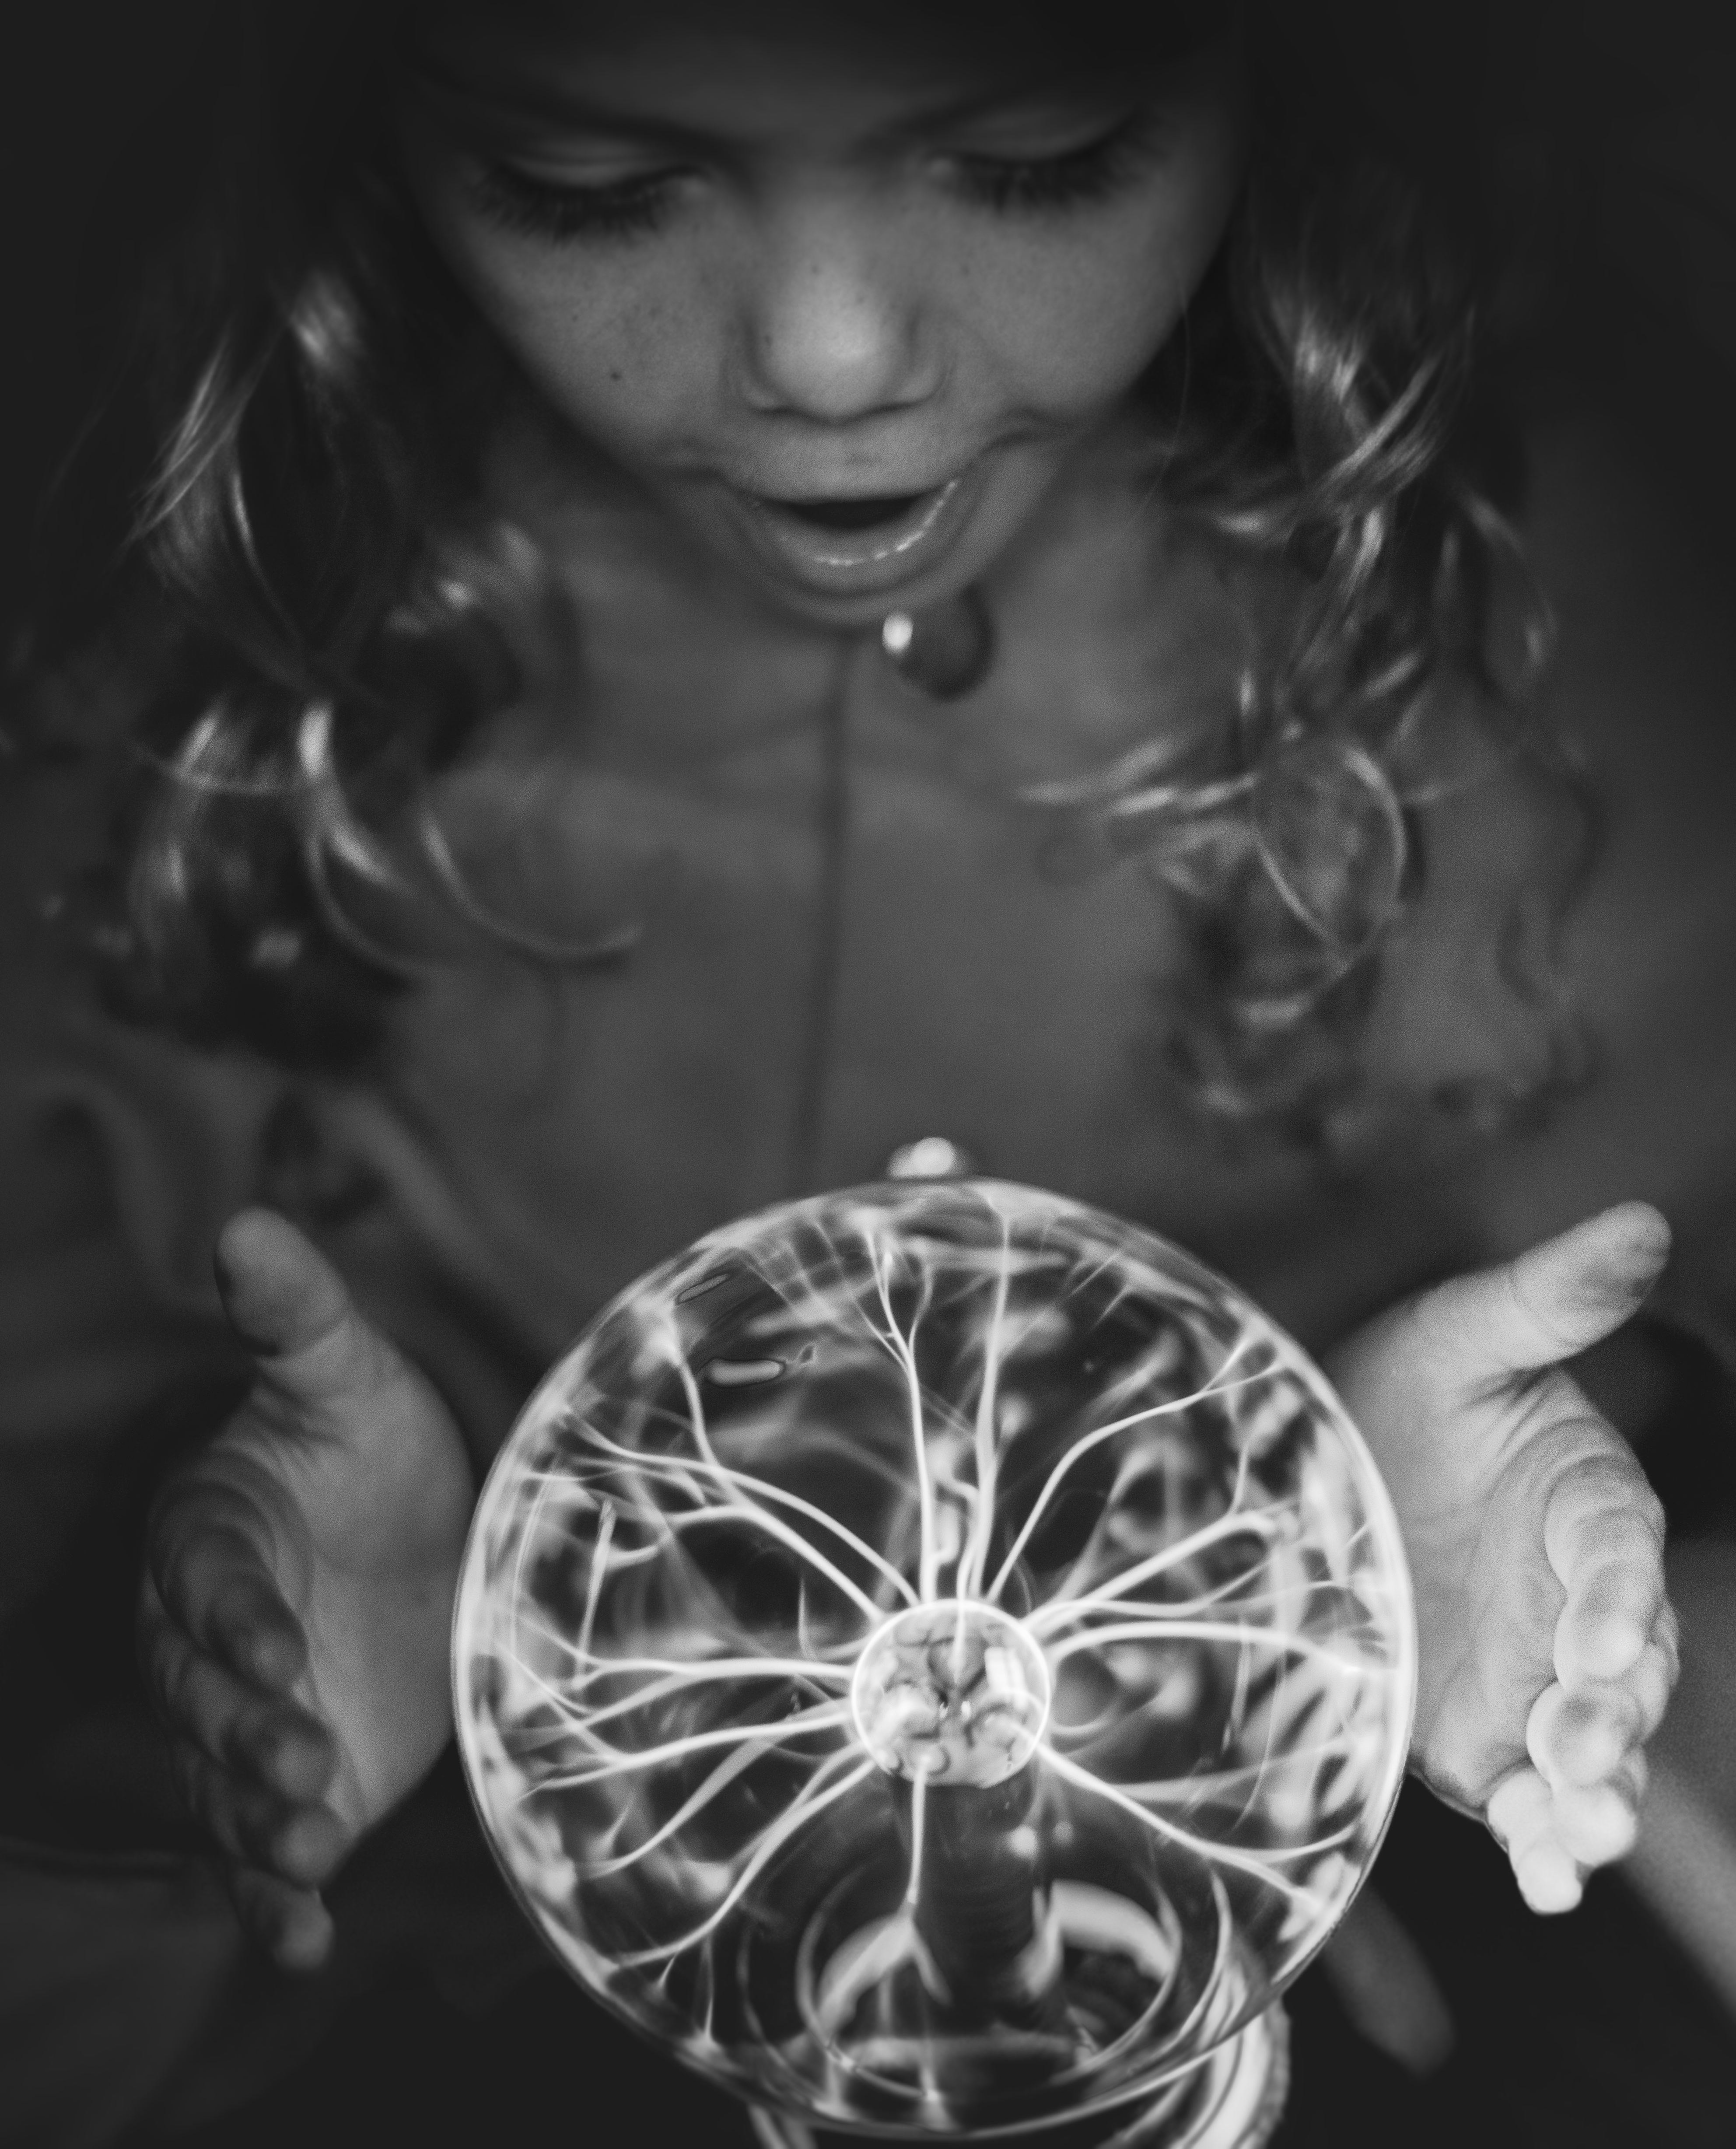 Black and white photo of a young girl fascinated by a plasma ball.